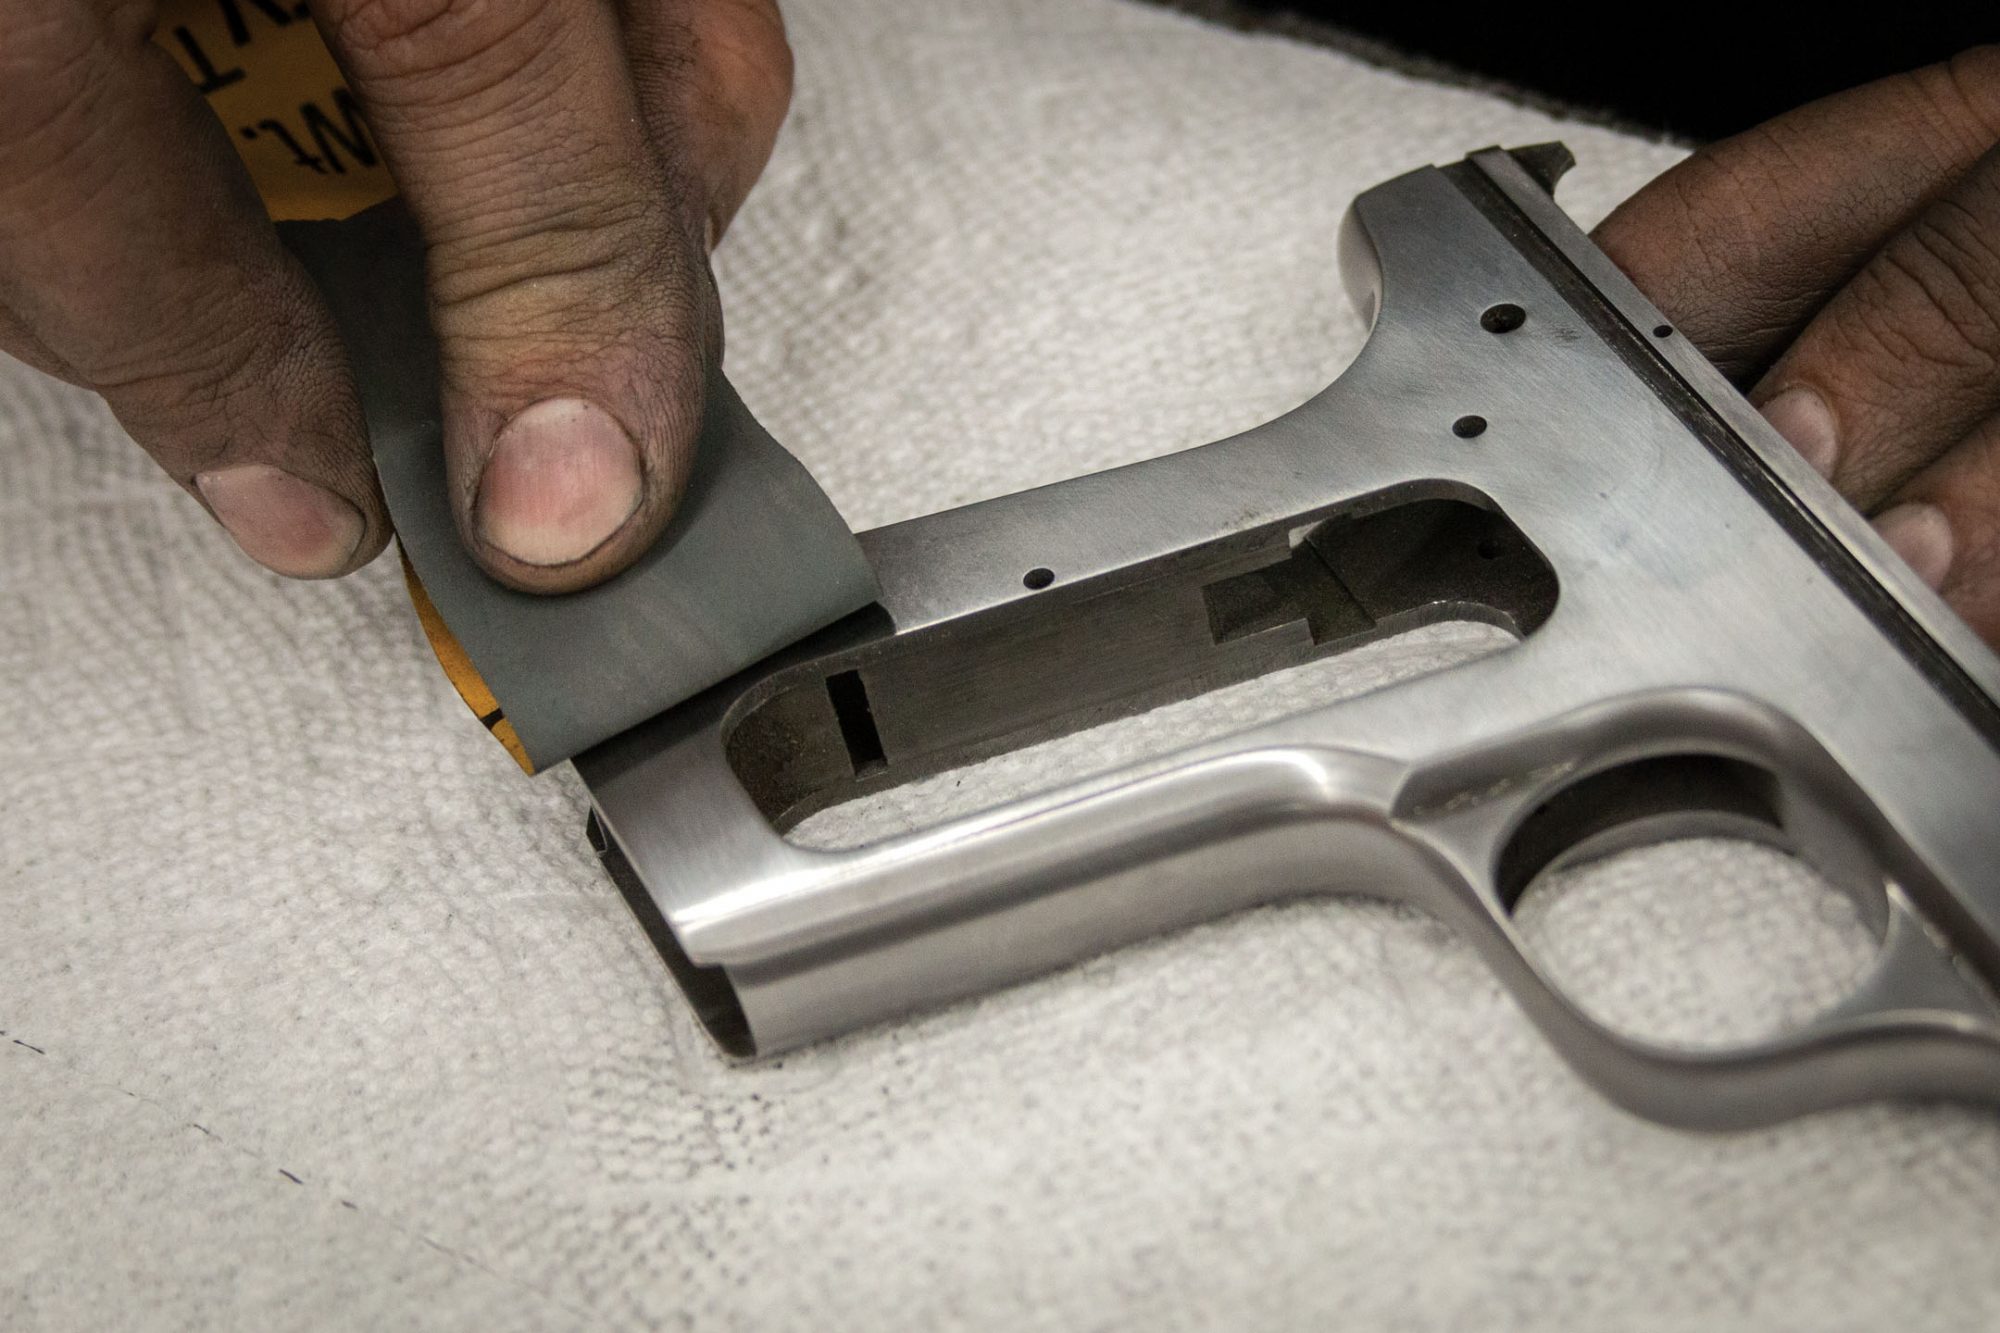 Colt 1908 Pocket Hammerless pistol from 1935, during restoration work by Turnbull Restoration Co. of Bloomfield, NY